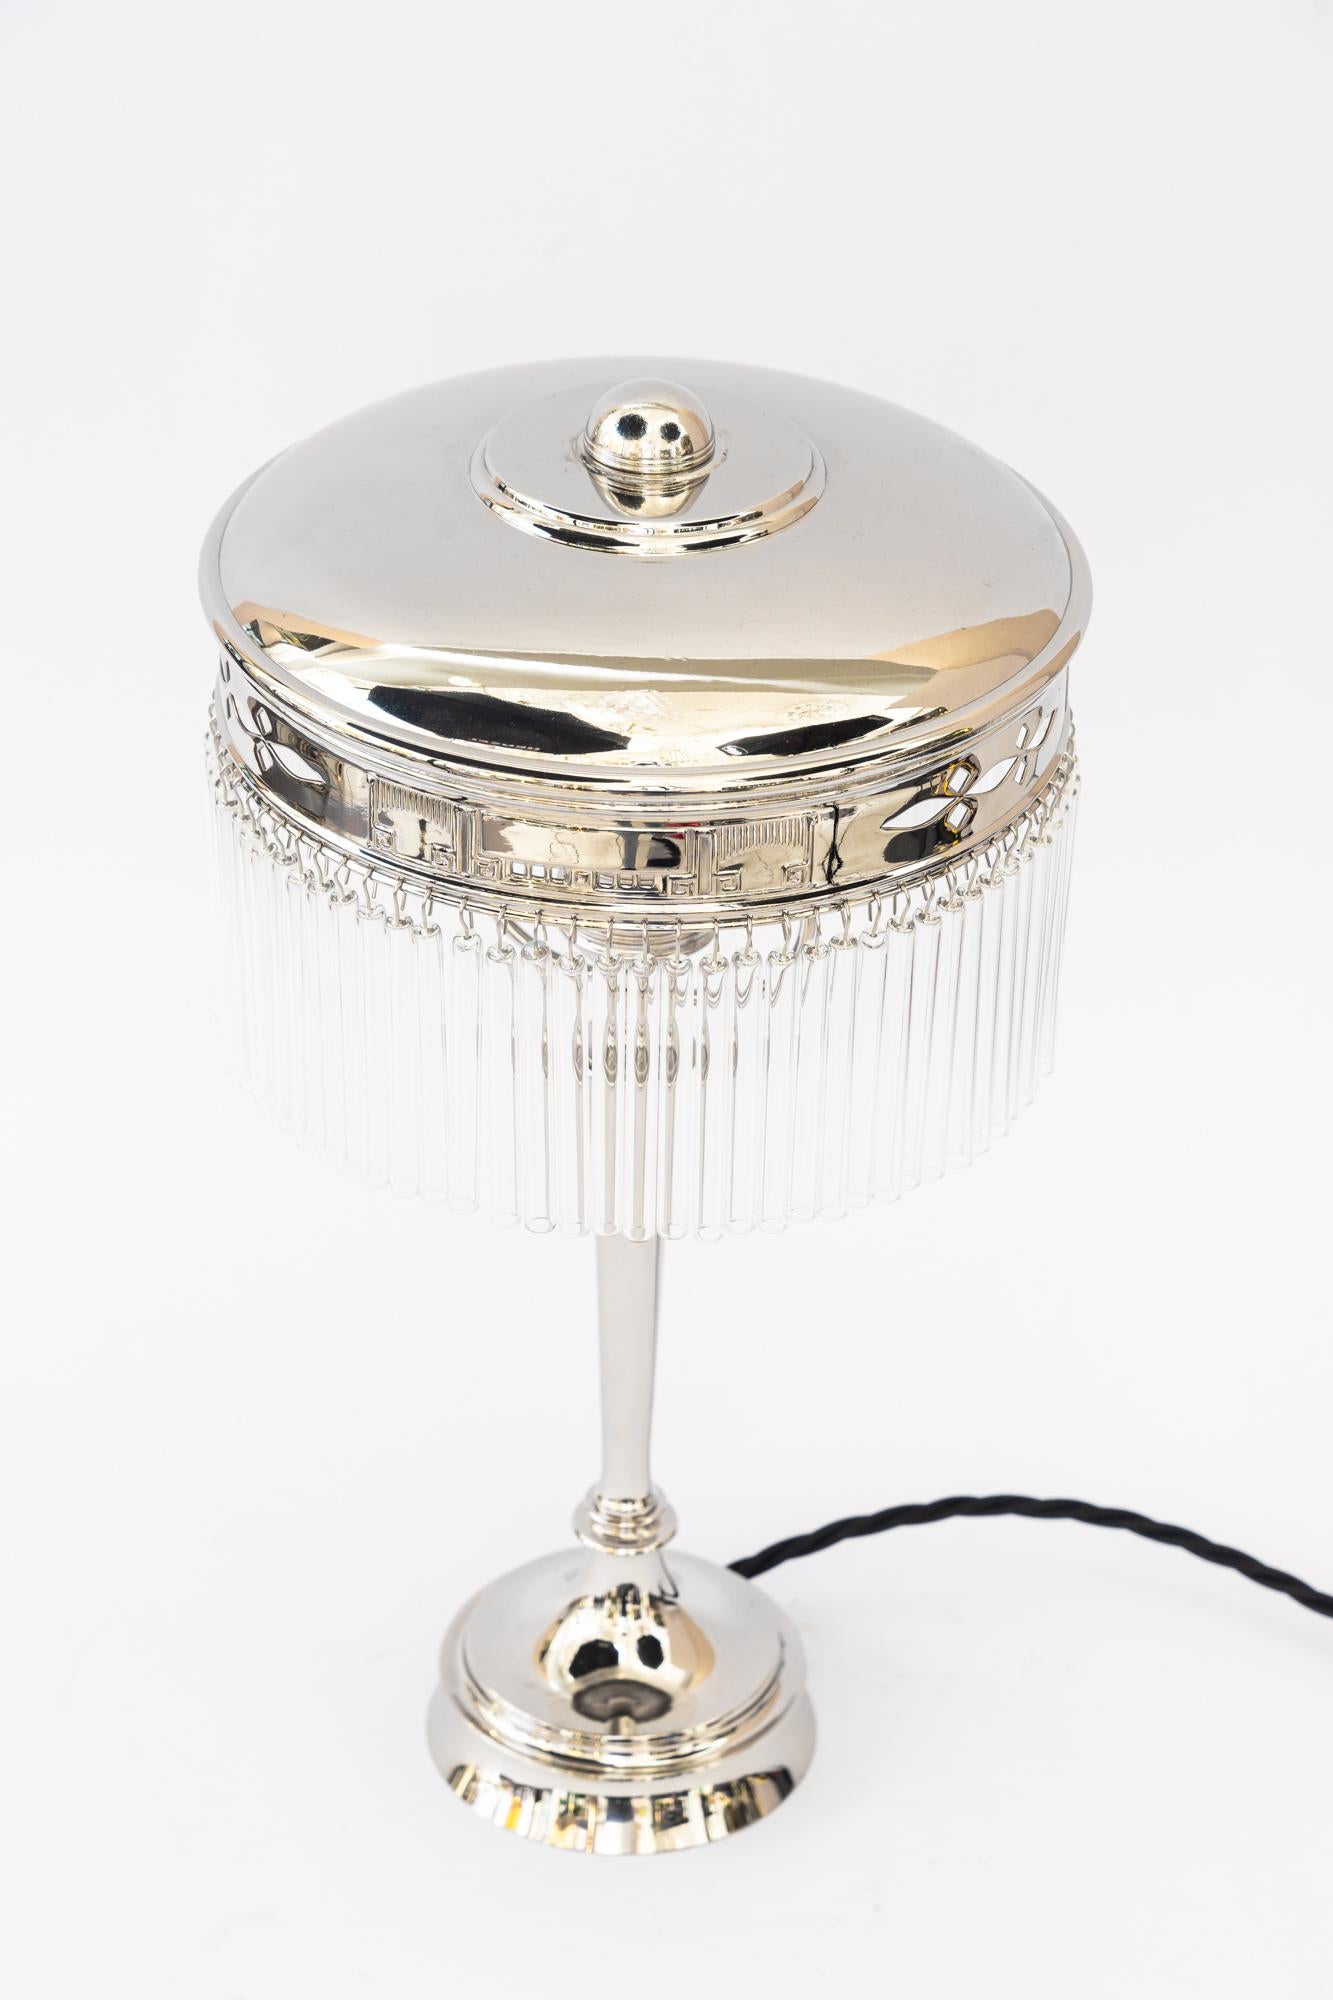 Art deco nickel - plated table lamp with glass sticks vienna around 1920s
The glass sticks are replaced ( new )